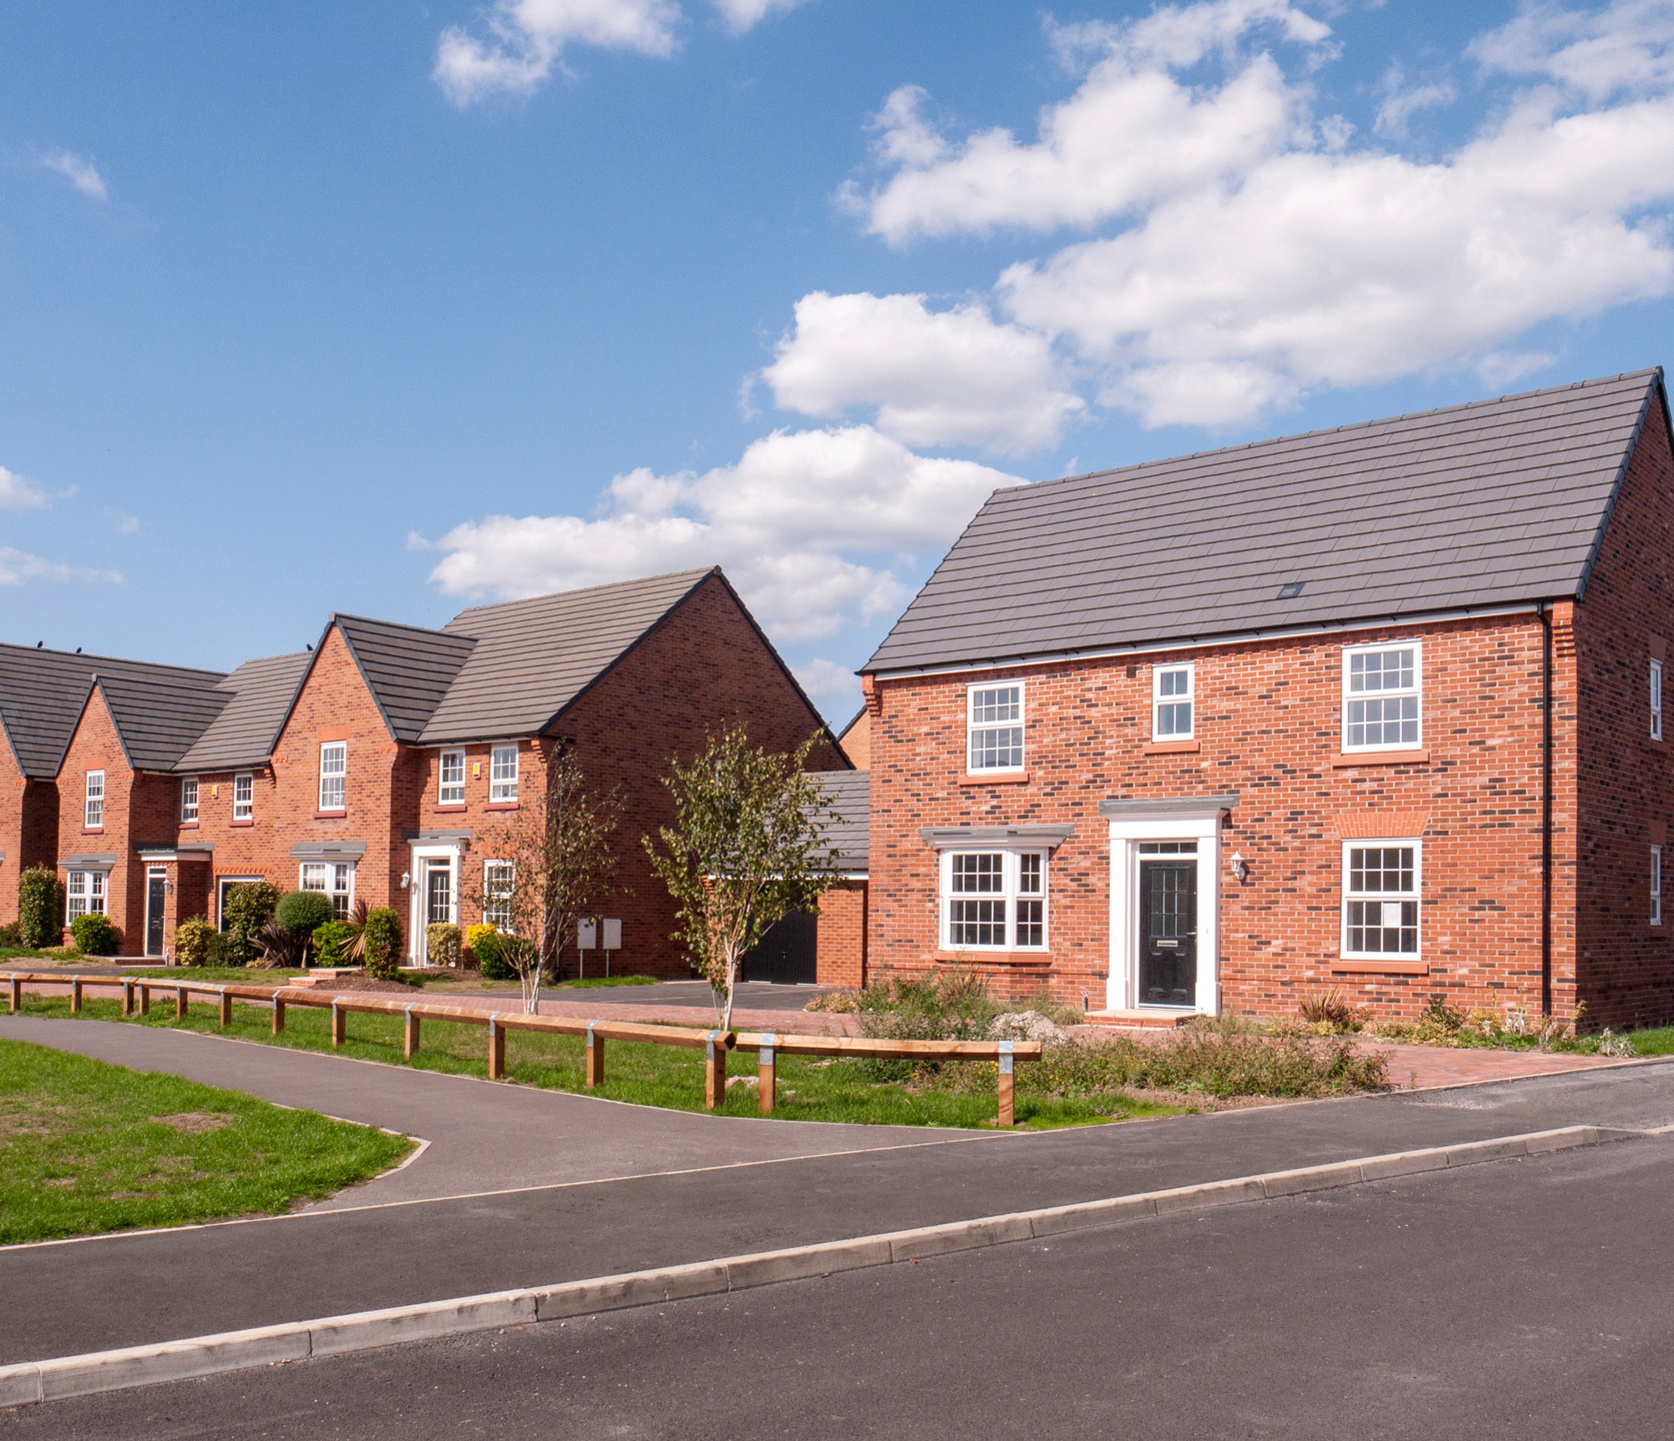 A row of new build houses, with a link to our Conveyancing Solicitors' page for First Time Buyers.